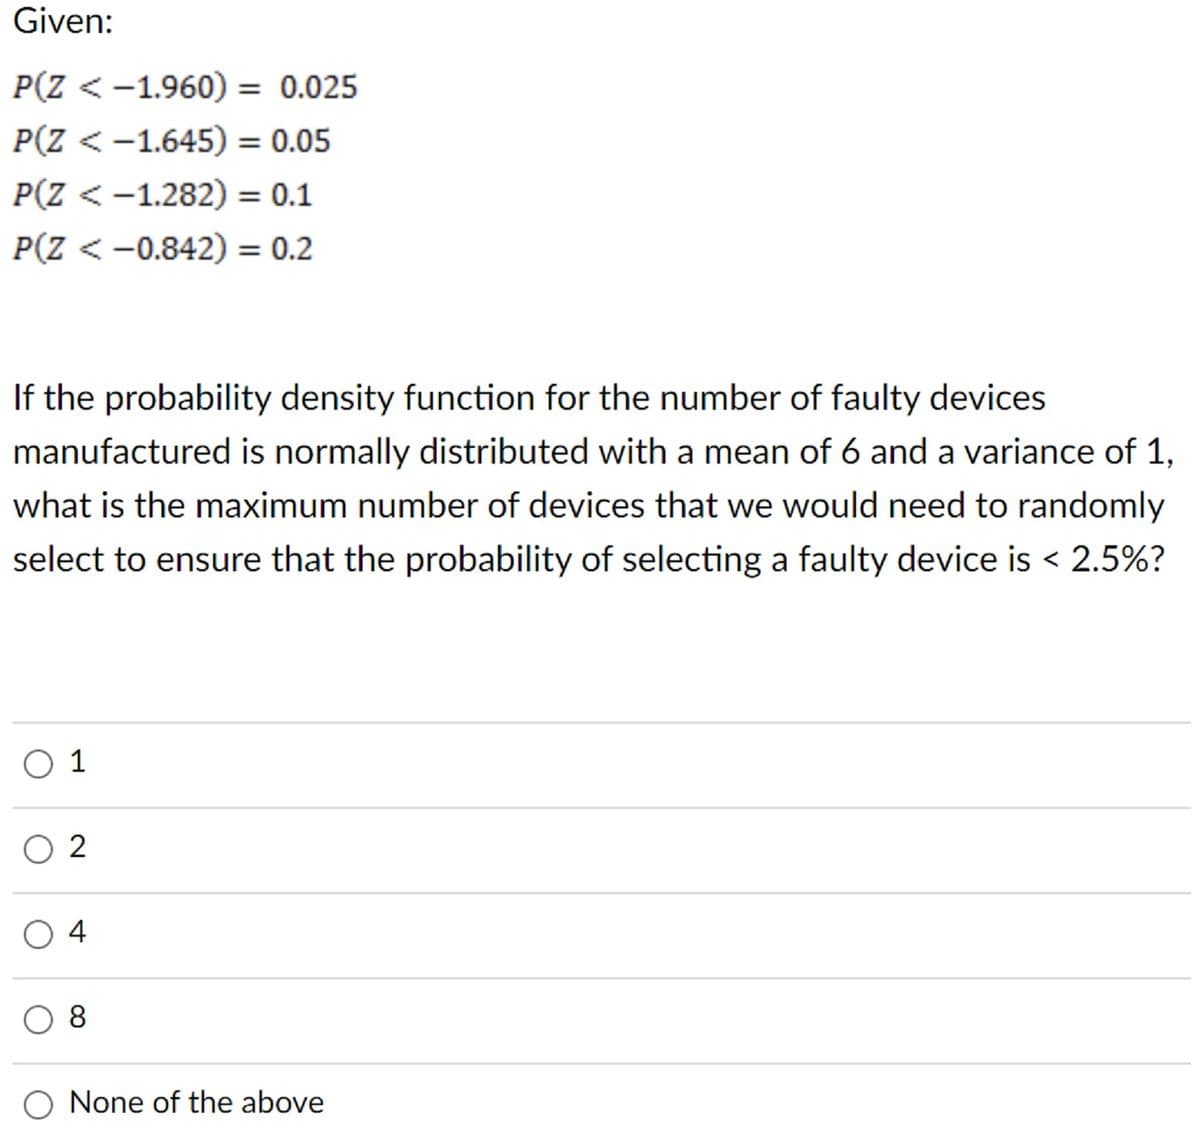 Given:
P(Z < -1.960) = 0.025
P(Z < -1.645) = 0.05
P(Z < -1.282) = 0.1
P(Z <-0.842) = 0.2
If the probability density function for the number of faulty devices
manufactured is normally distributed with a mean of 6 and a variance of 1,
what is the maximum number of devices that we would need to randomly
select to ensure that the probability of selecting a faulty device is < 2.5%?
01
2
04
8
None of the above